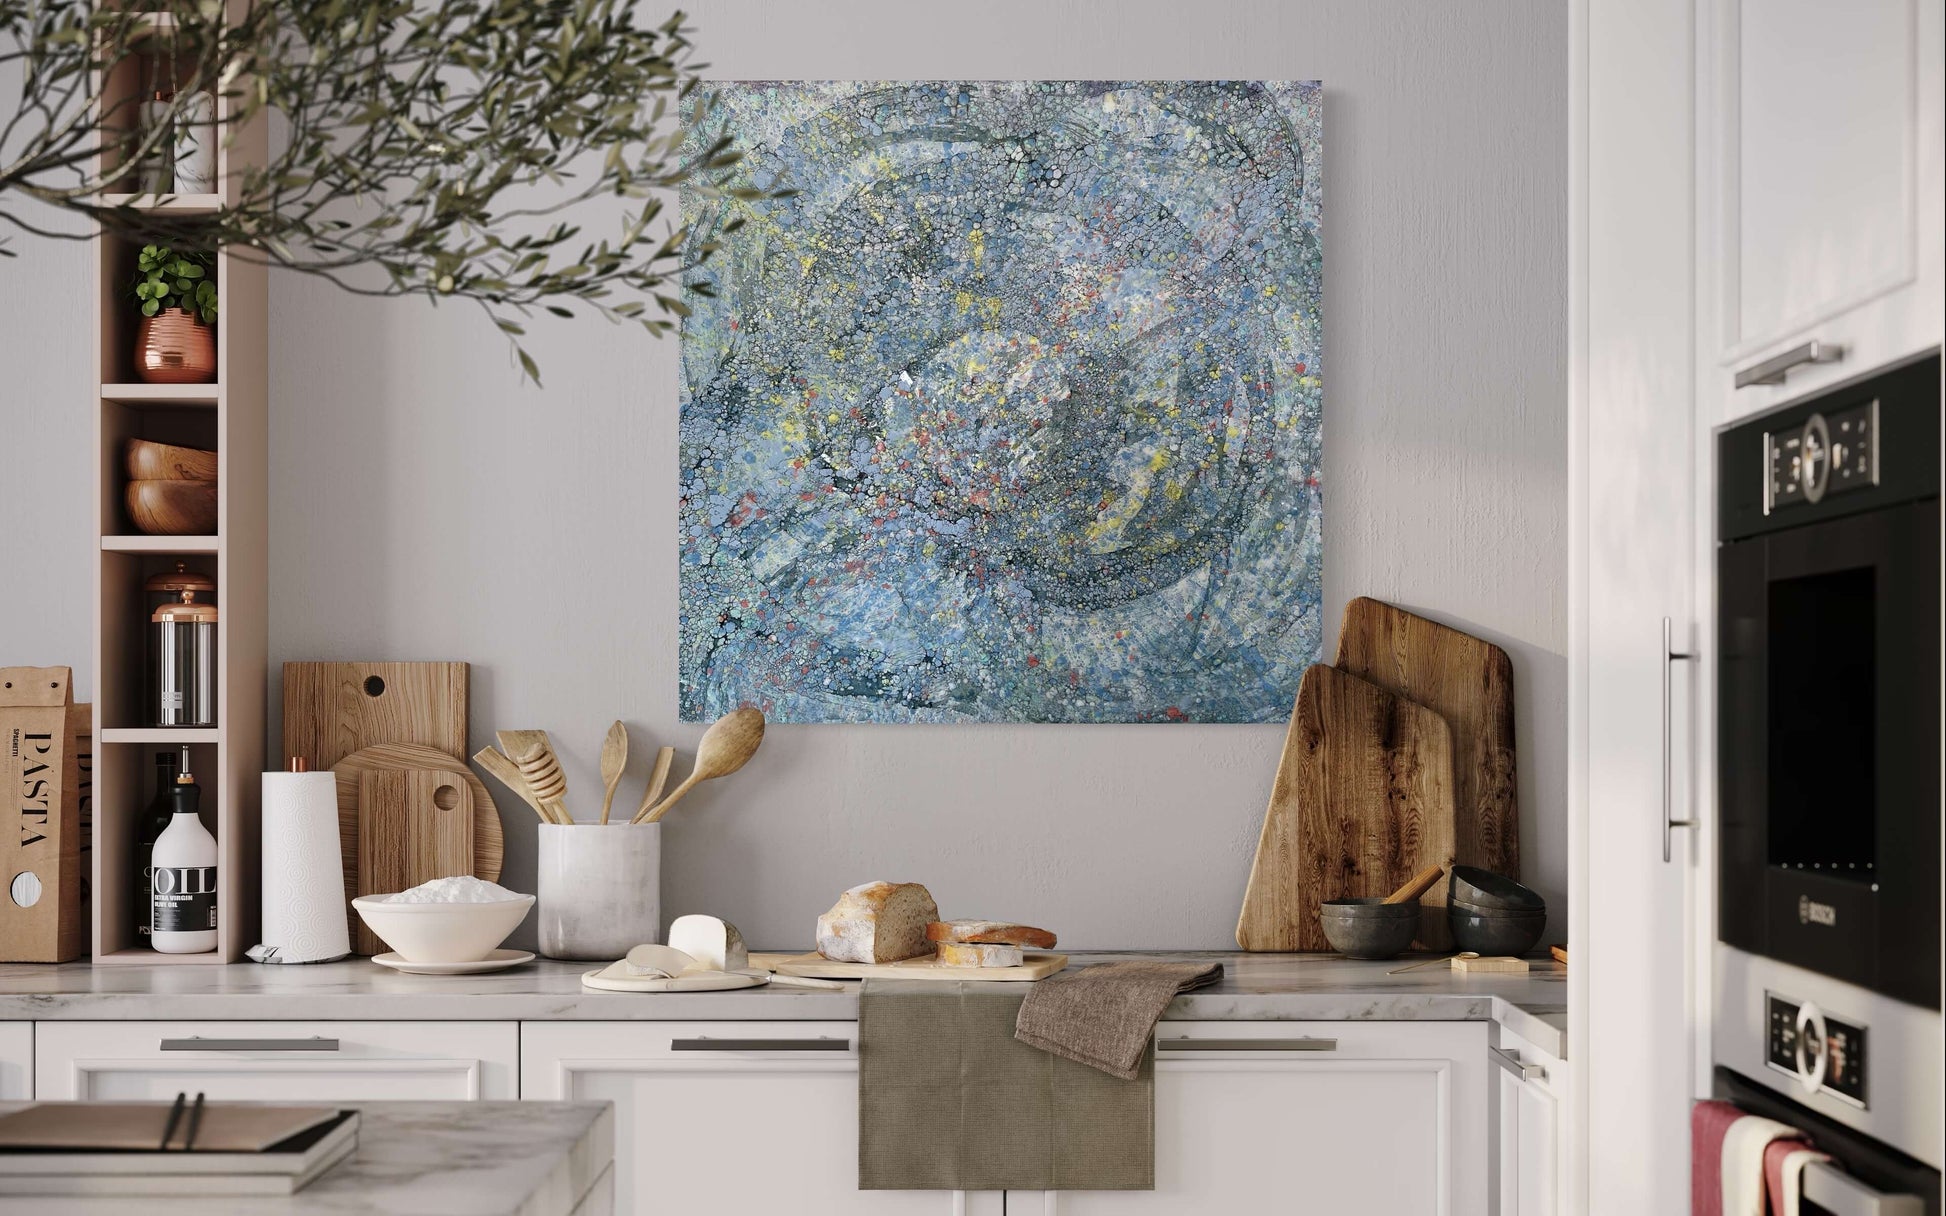 In situ.This piece has a very uplifting energy with its variations of blues, greys and specks of yellow and orange. it is a textured painting, when you run your fingers over it, you will feel ripples of wax. The droplets of orange wax signifies Monarch butterflies taking to the sky.